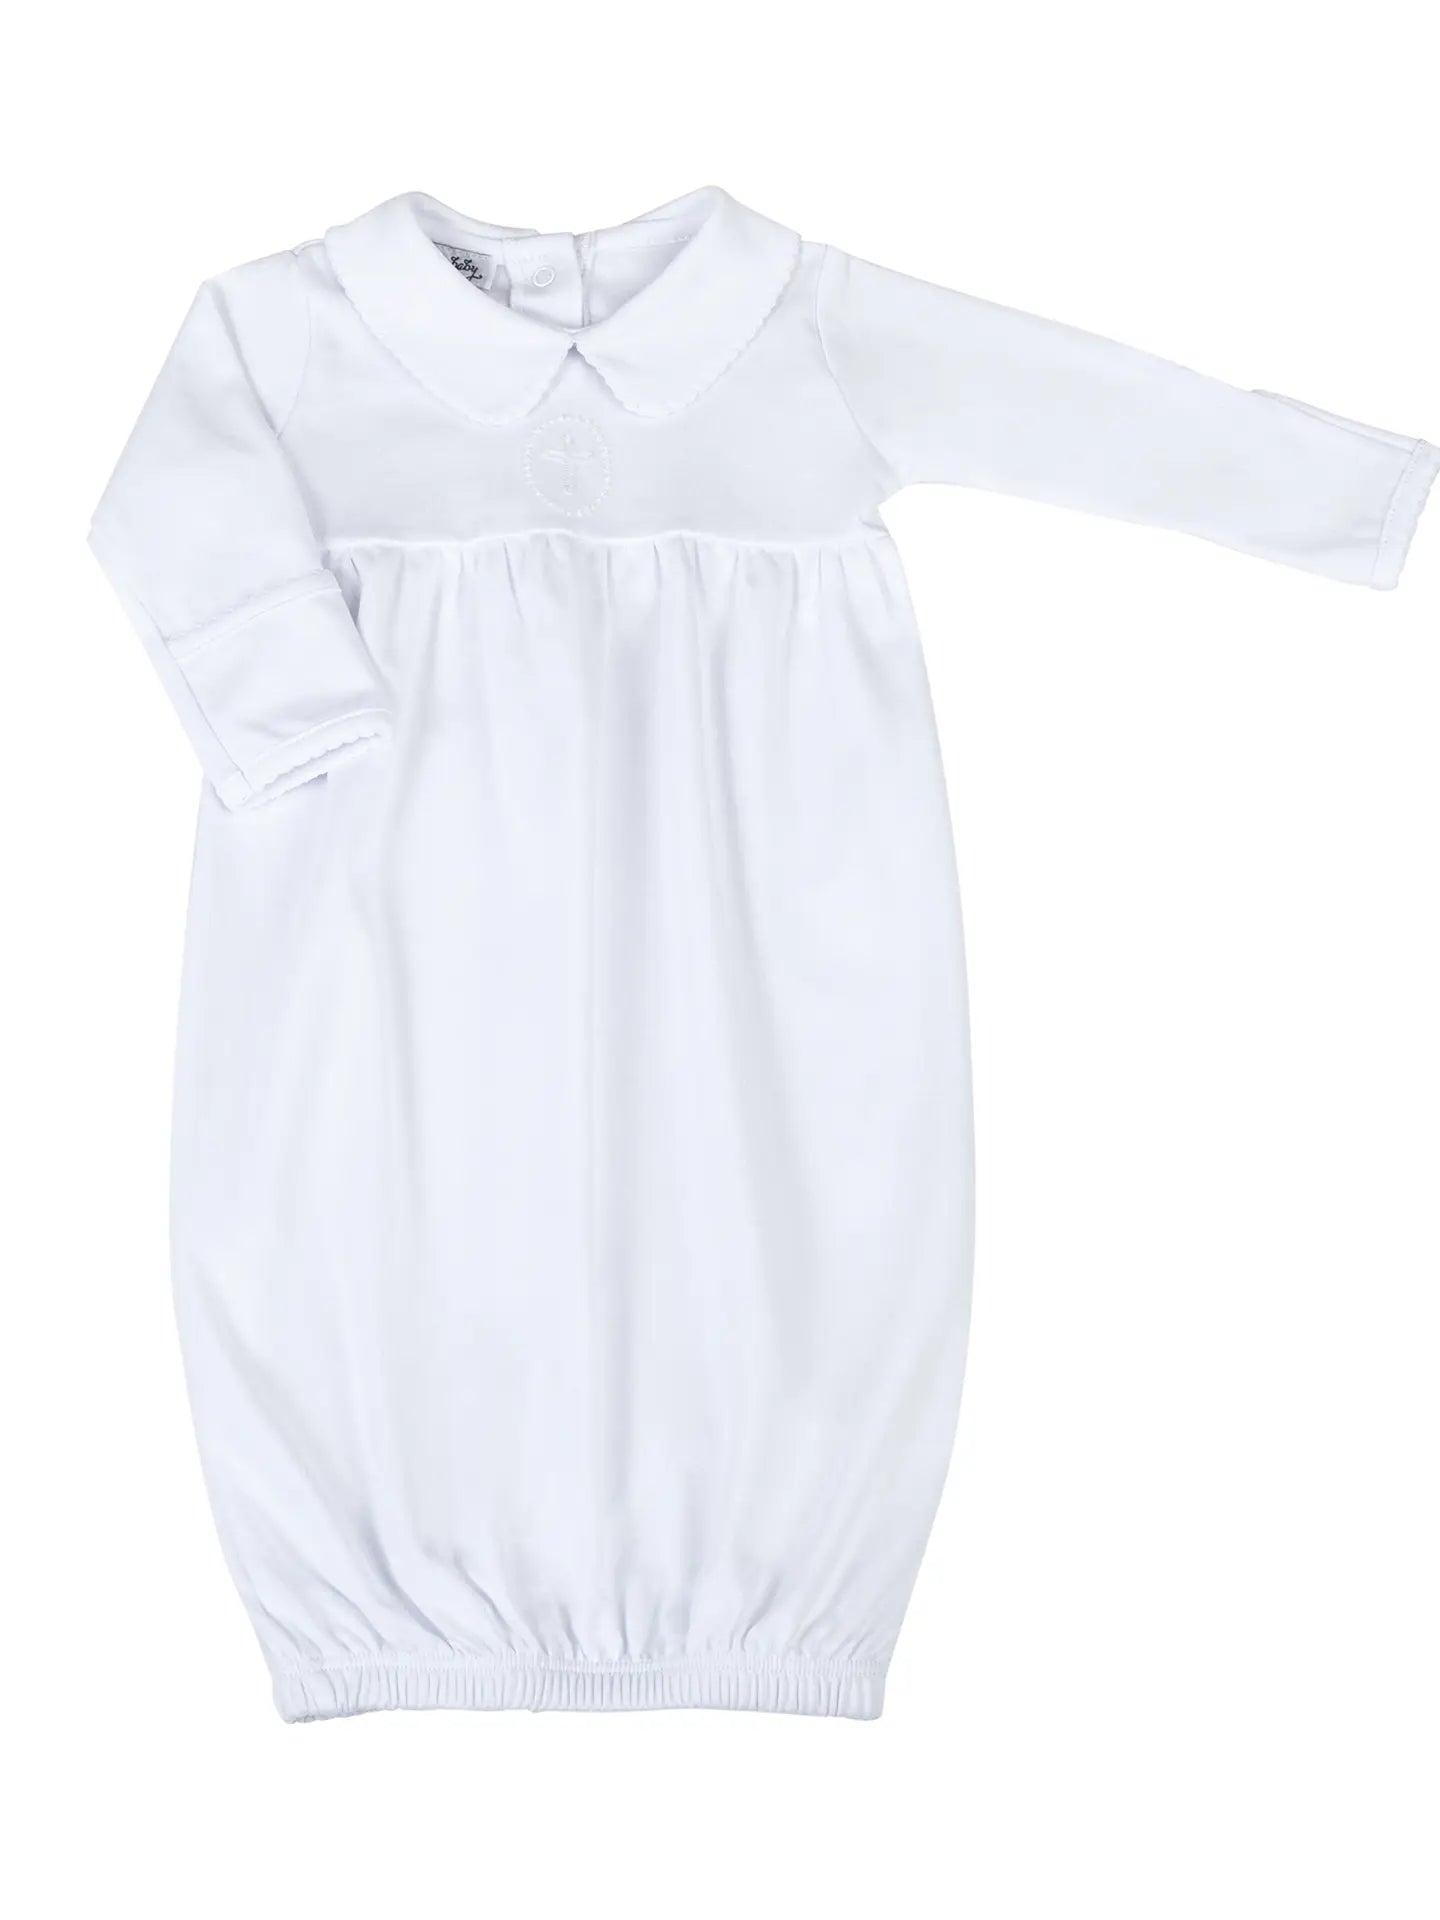 Magnolia Baby: Embroidered Gathered Gown - White